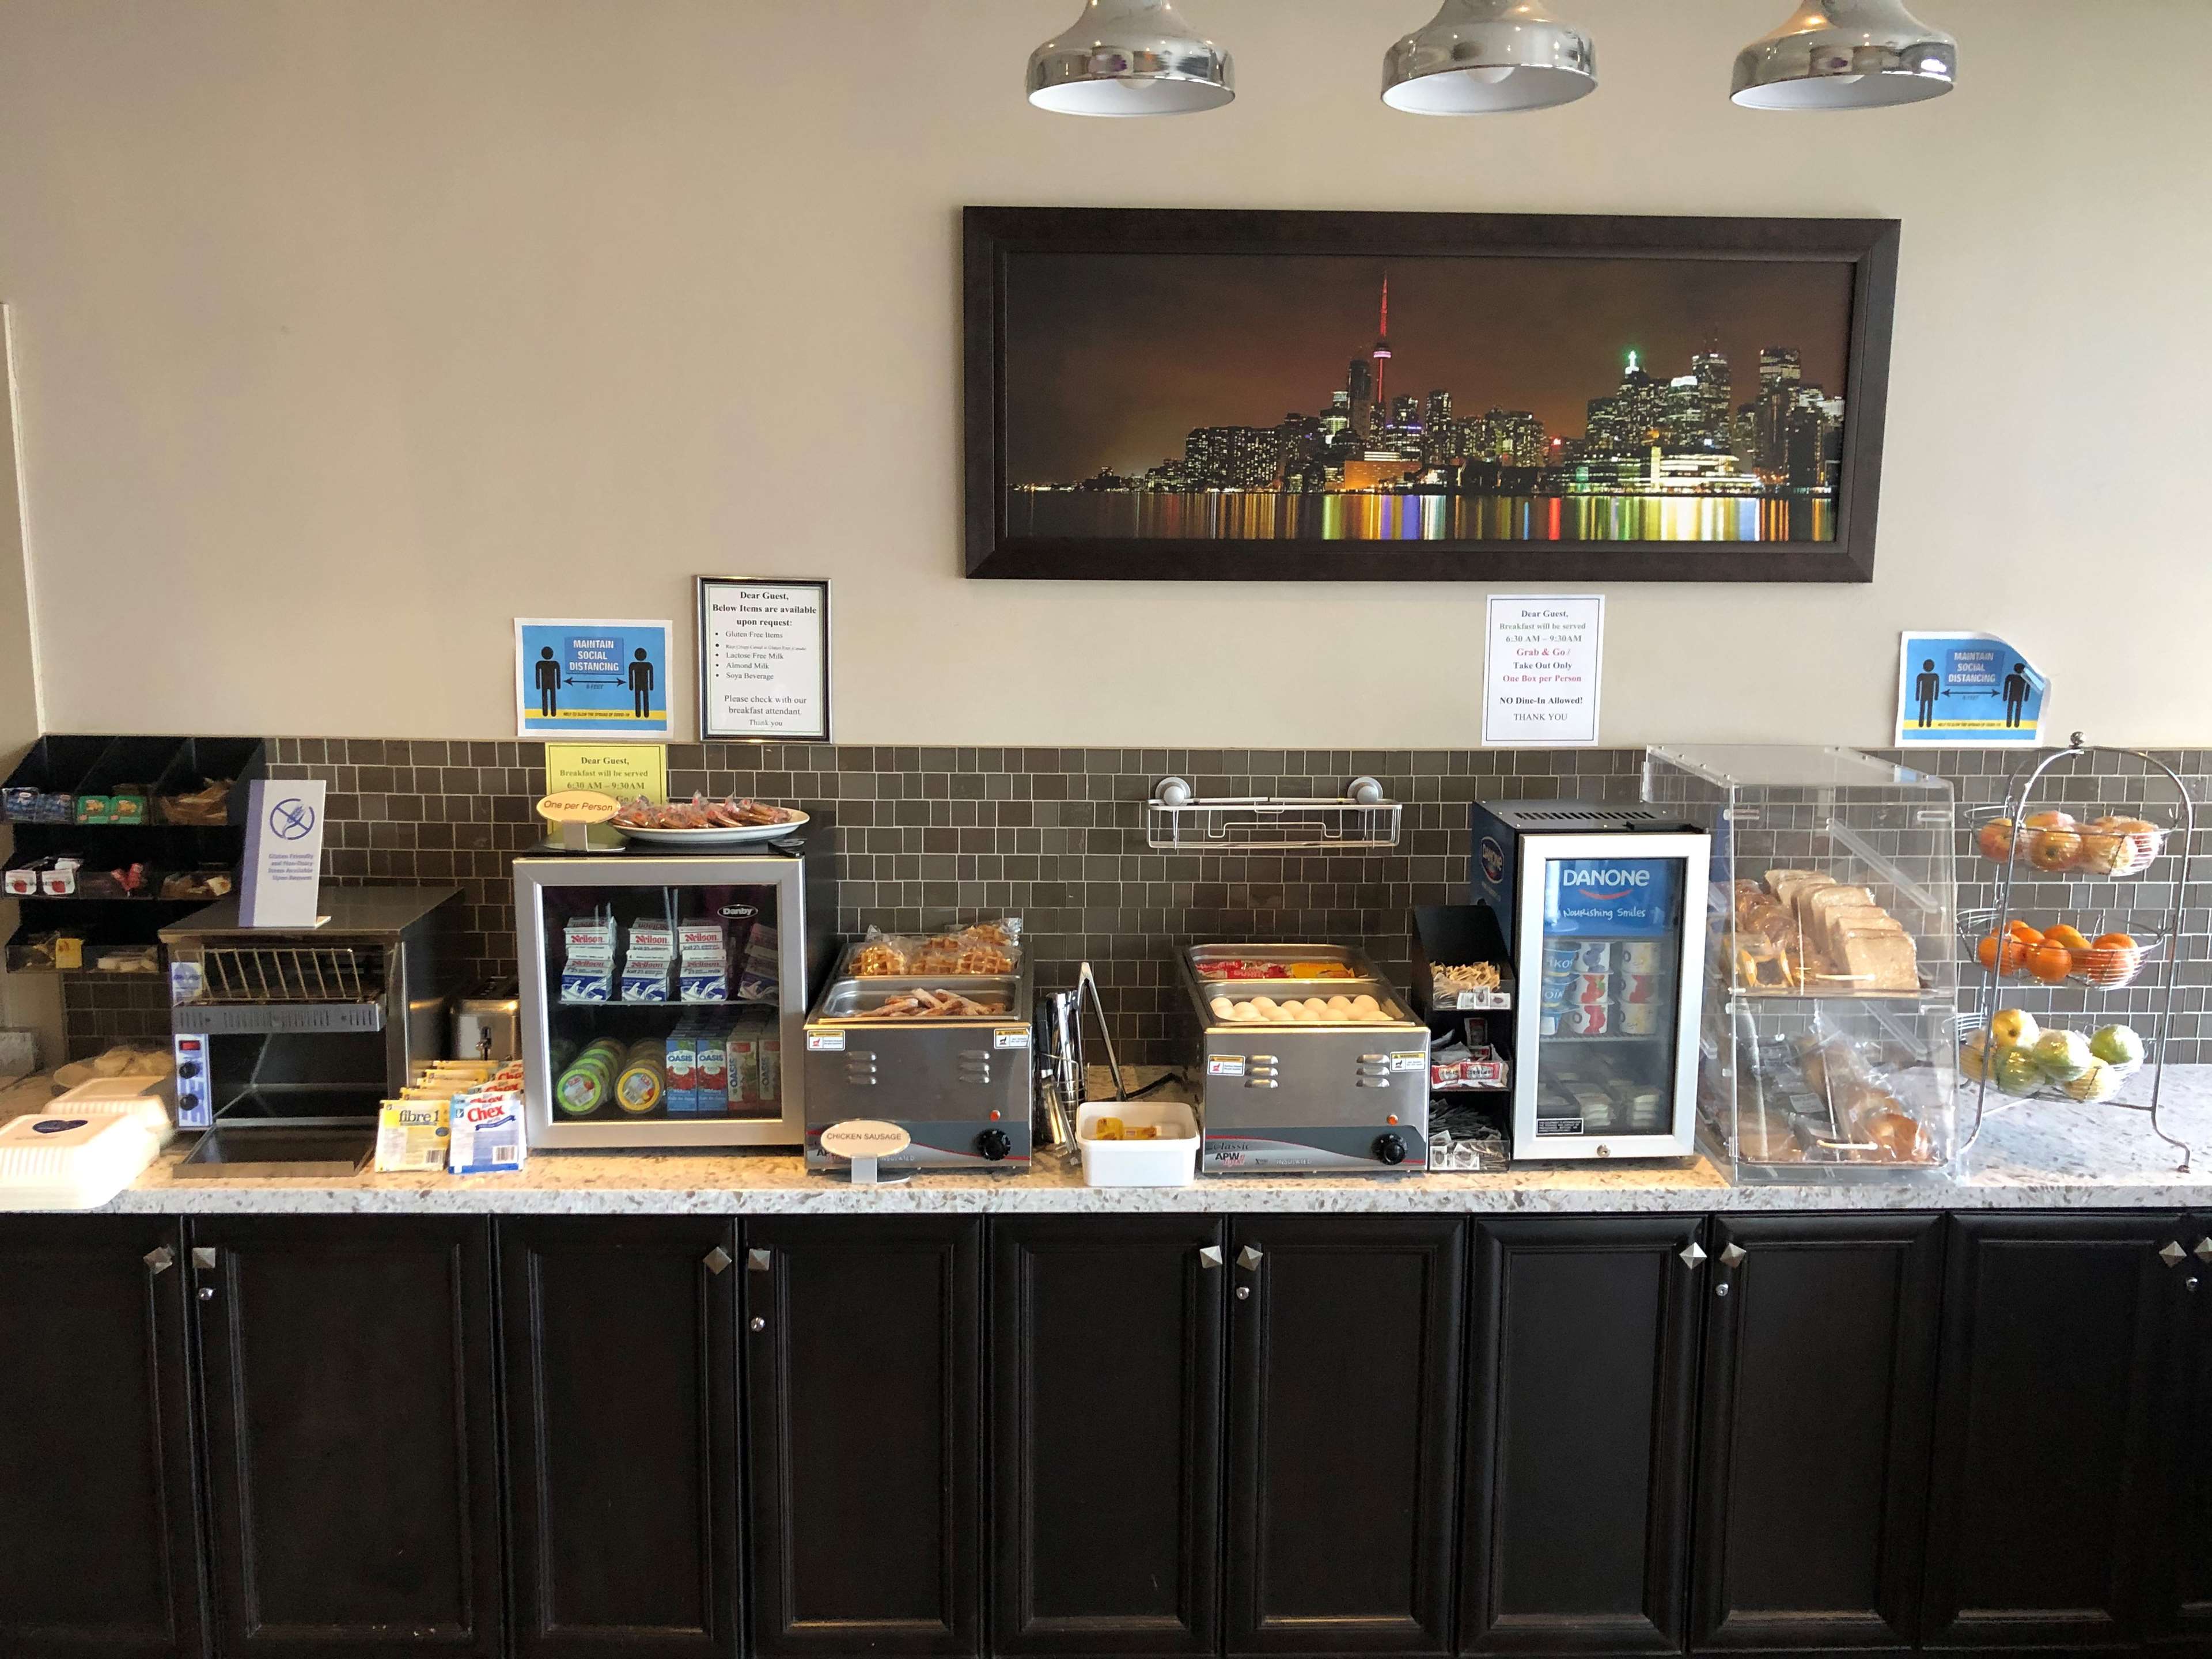 Best Western Plus Travel Hotel Toronto Airport in Toronto: Breakfast Buffet (Take out) 6:30-9:30am in our Breakfast Room